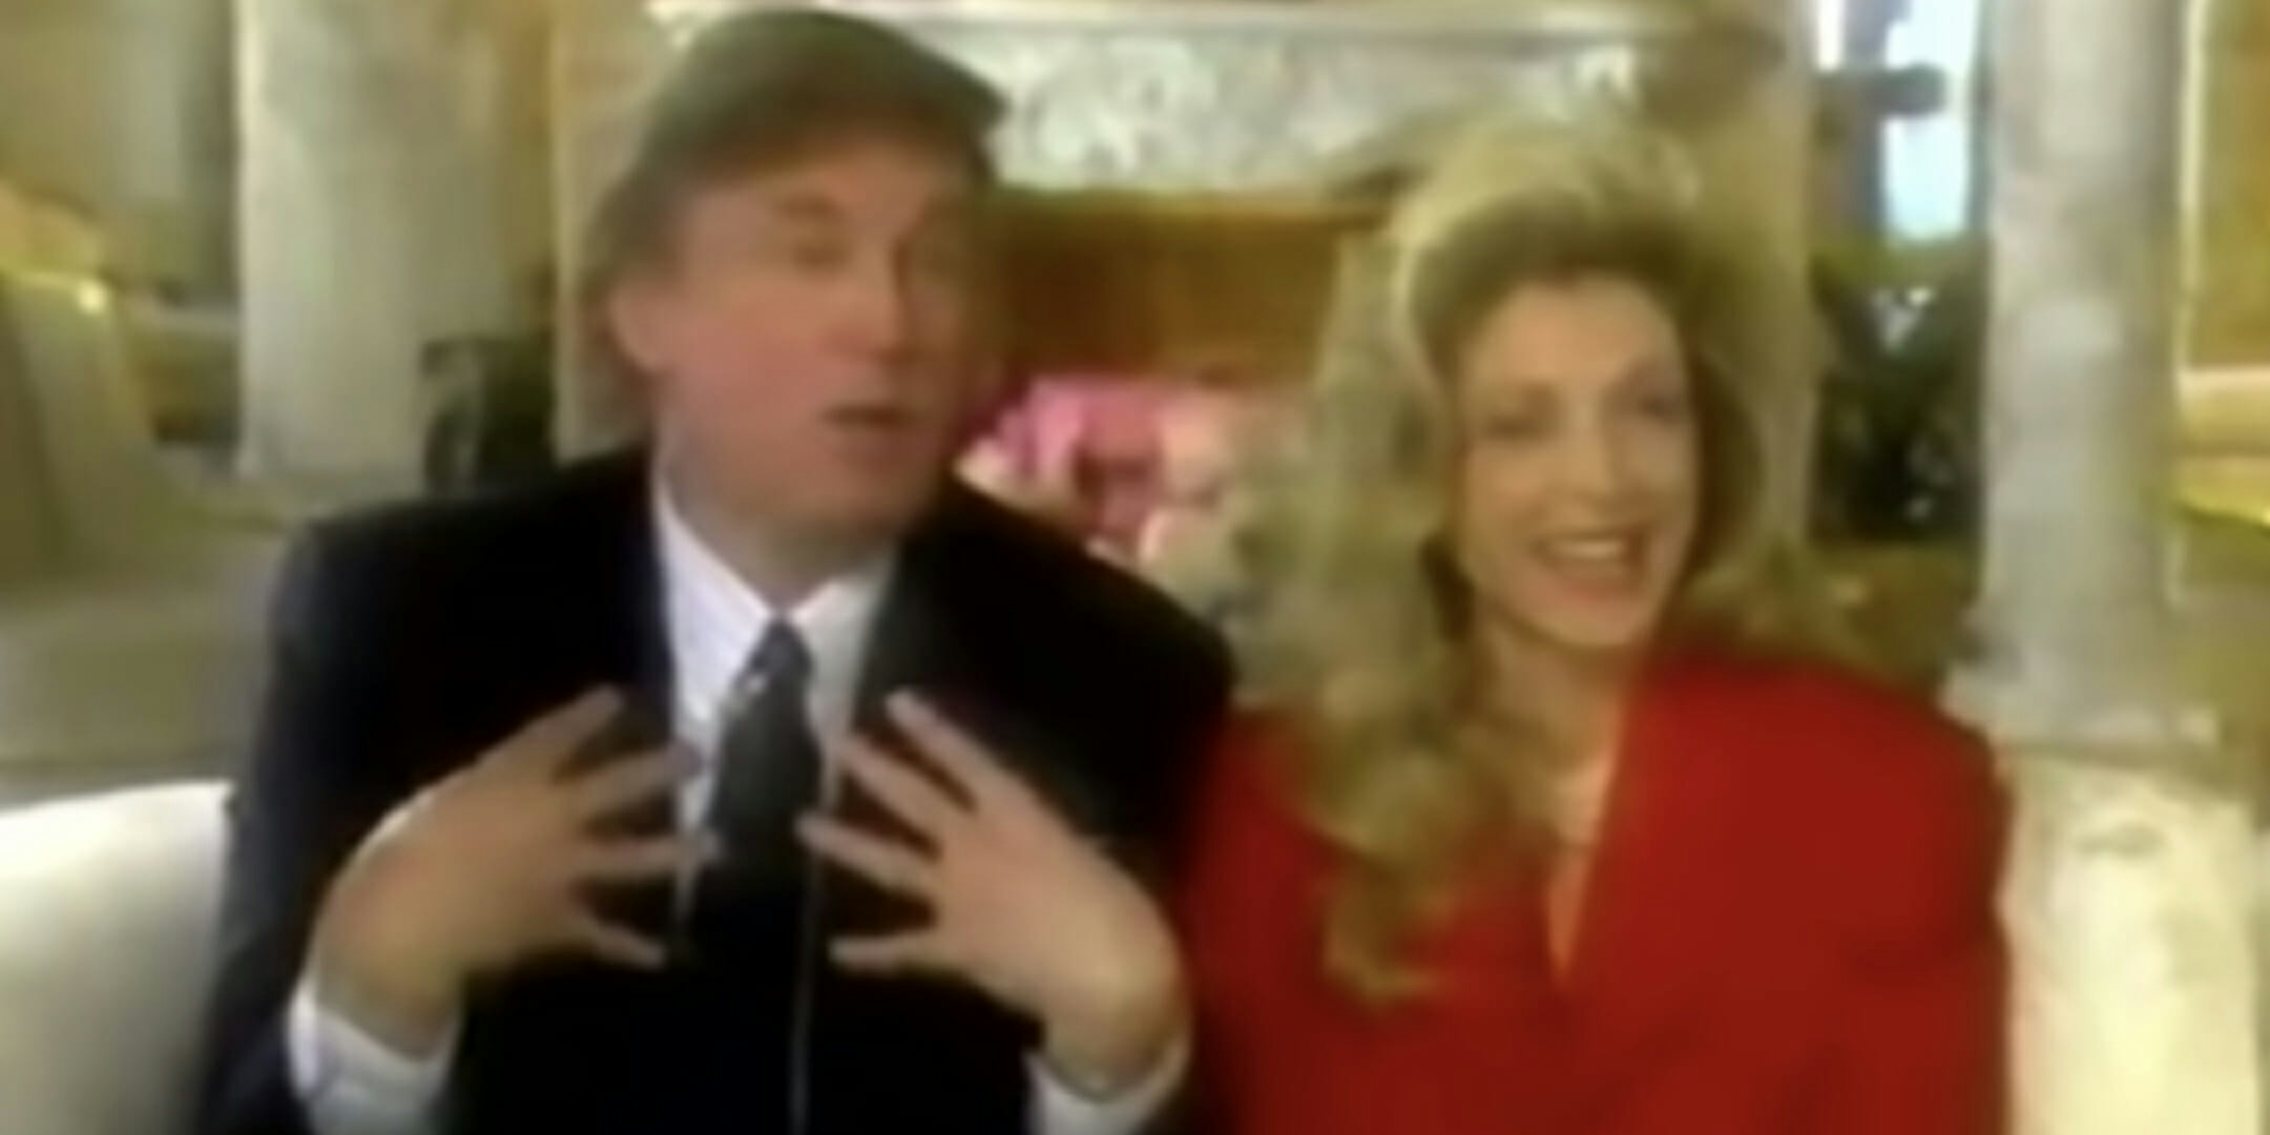 Trump talks about his 1-year-old daughter Tiffany's legs and breasts in a 1994 interview with Robin Leach.